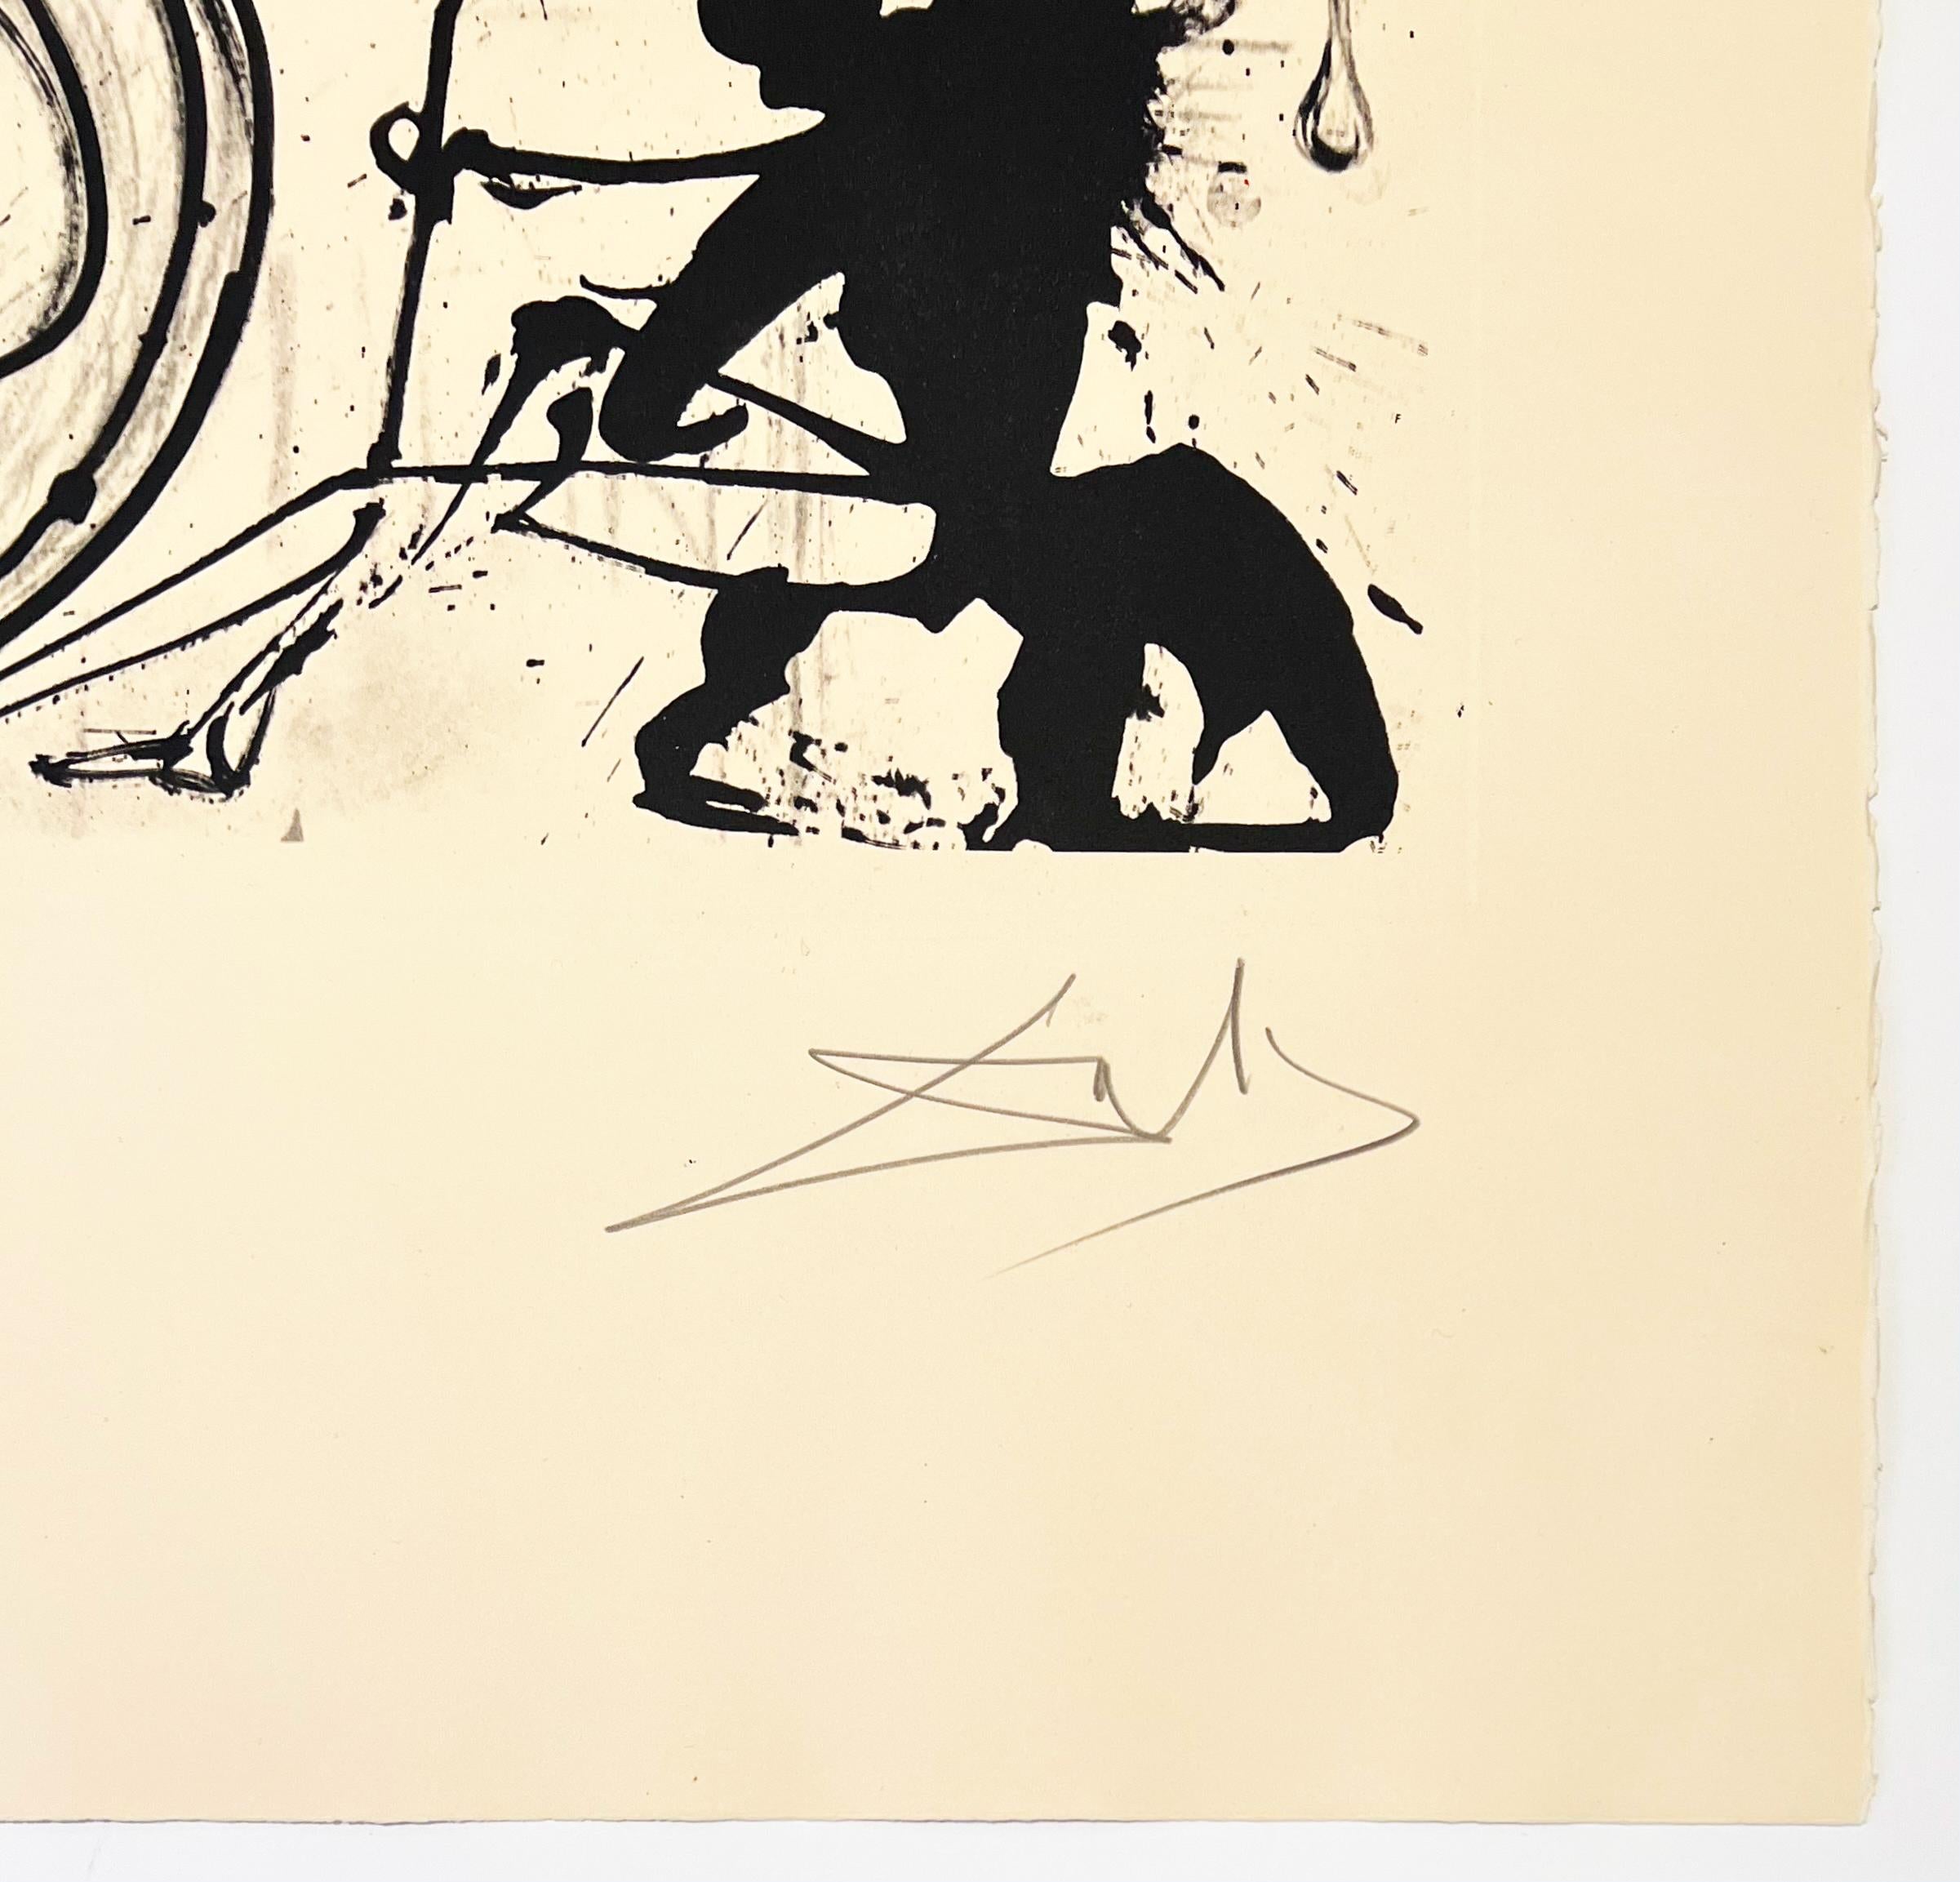 Artist: Salvador Dali
Title: Angel of Dada Surrealism
Portfolio: Memories of Surrealism
Medium: Etching and photolithograph
Date: 1971
Edition: AP XIV/XXV (artist's proof 14/25, aside from the edition of 175)
Sheet Size: 29 3/4